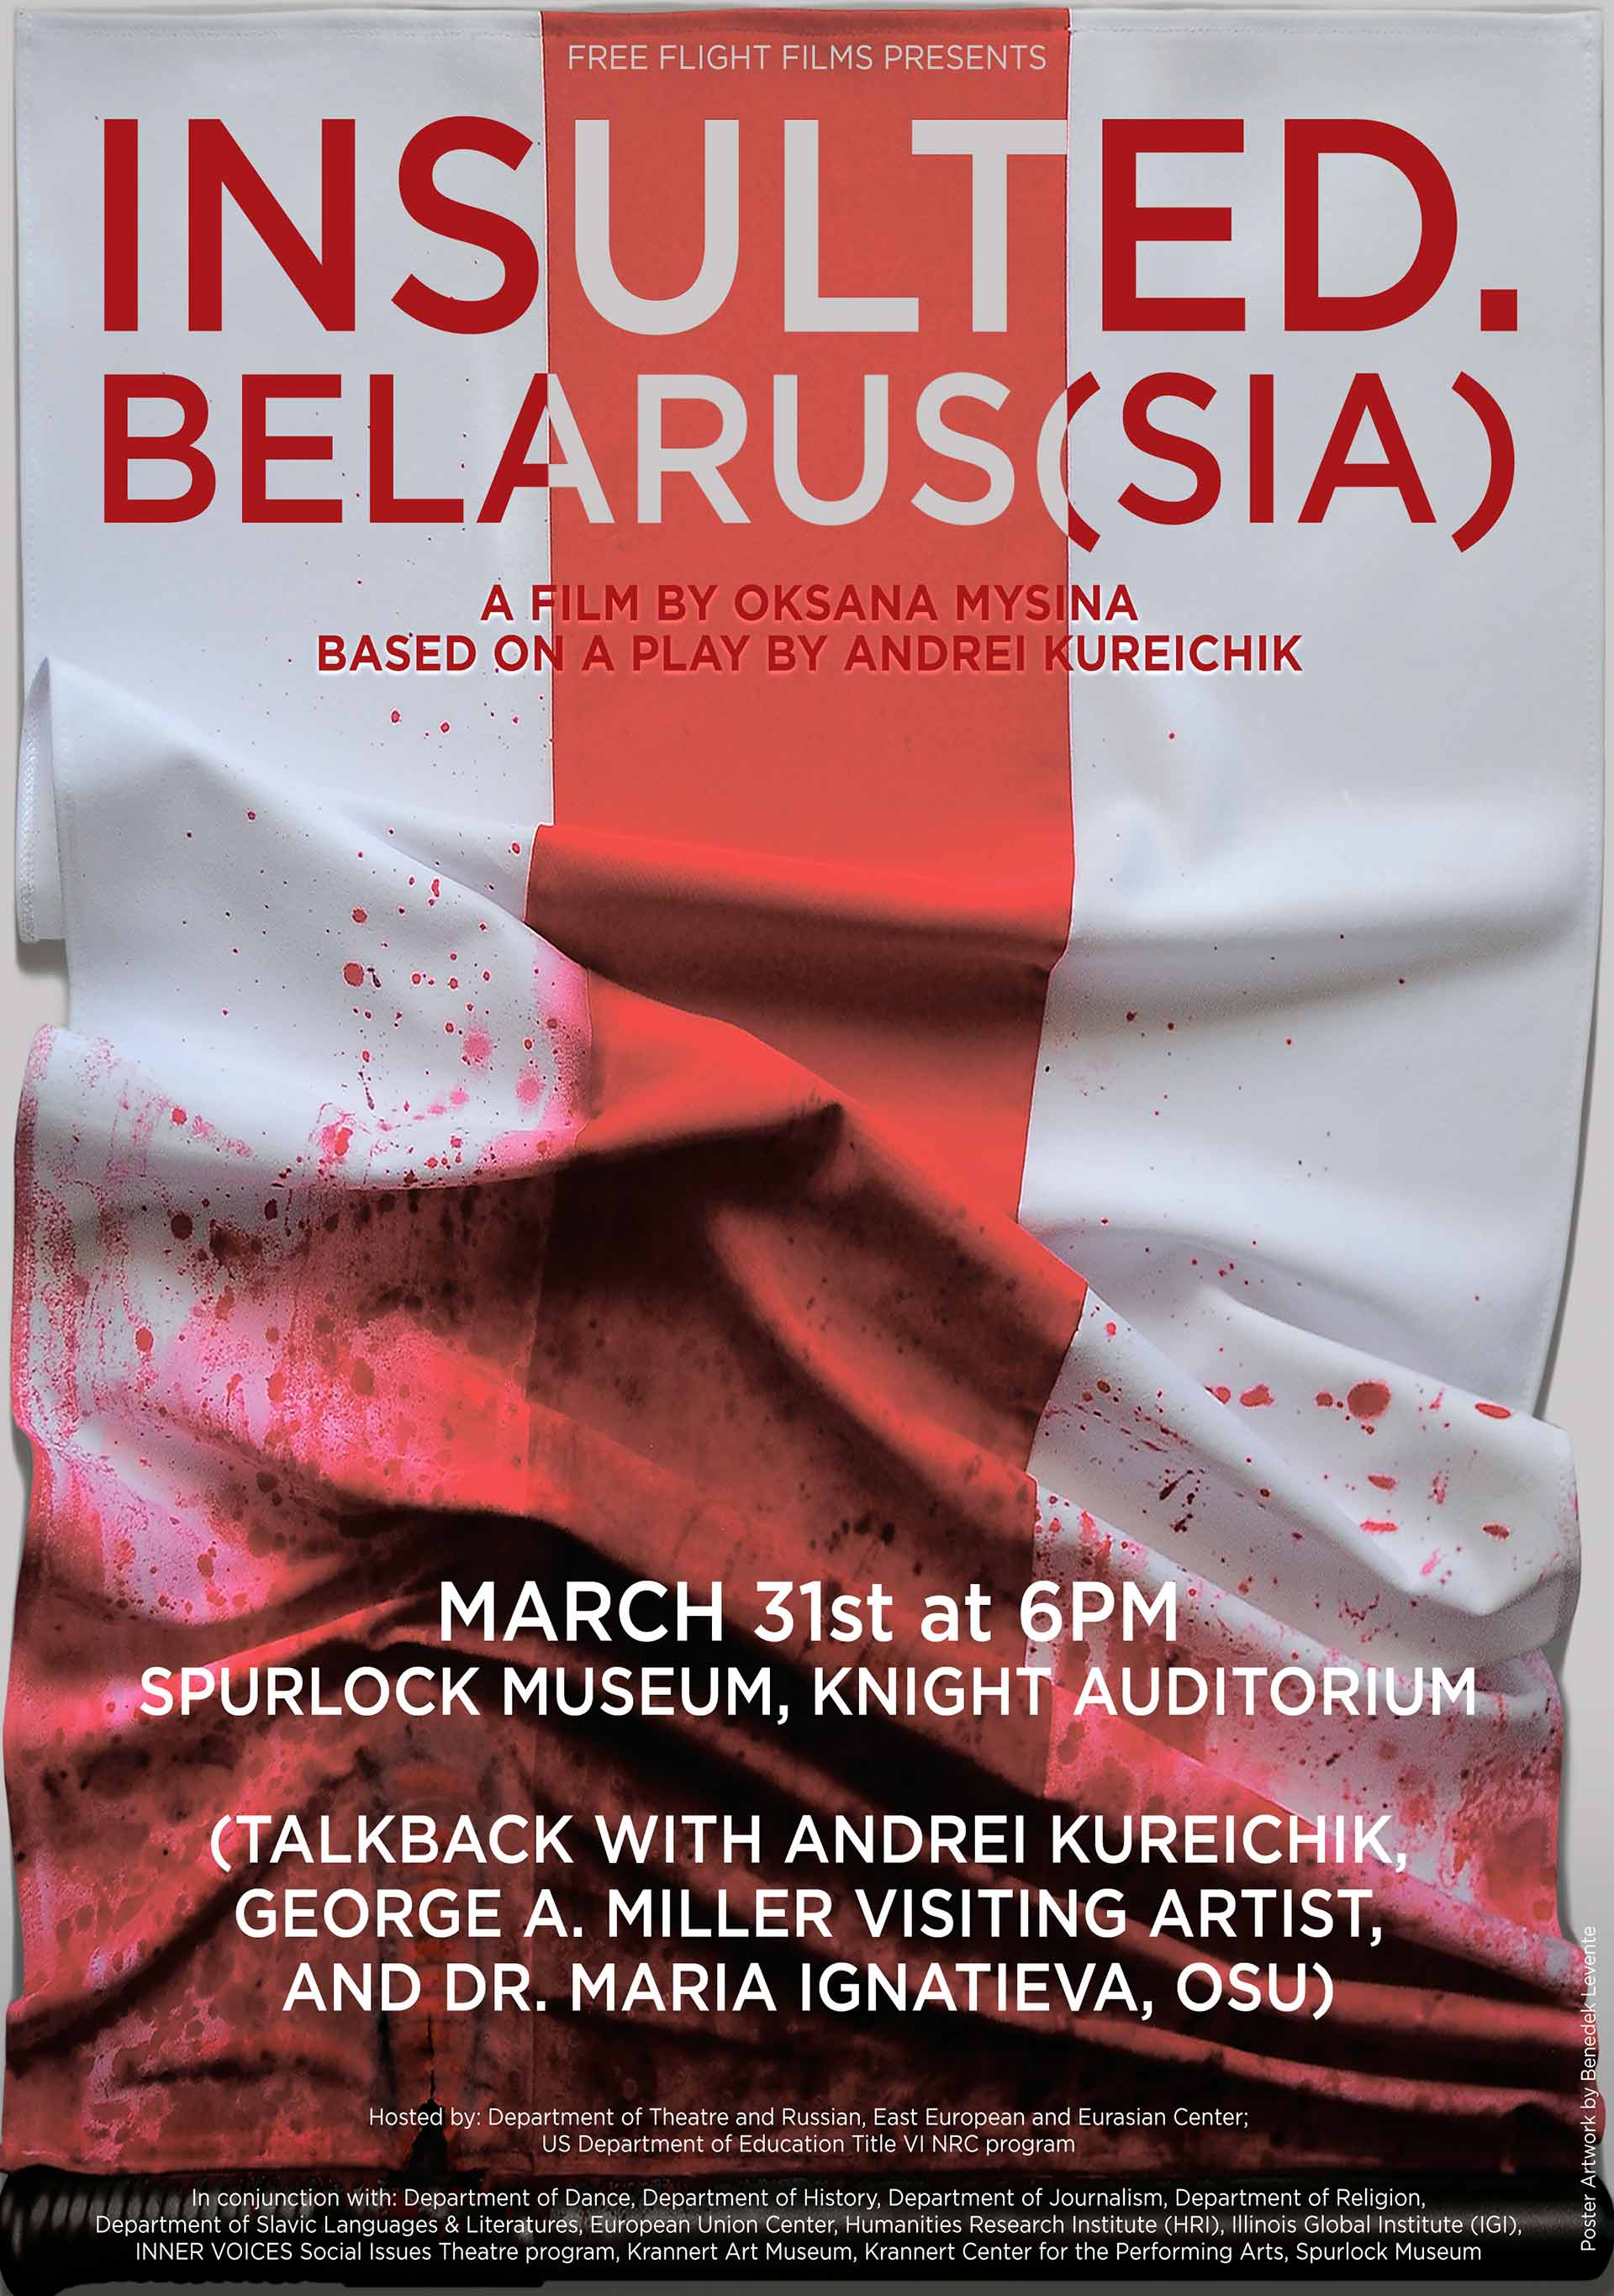 Full event poster with details repeated elsewhere in this listing on a red/white flag that becomes bloodstained and wrinkled